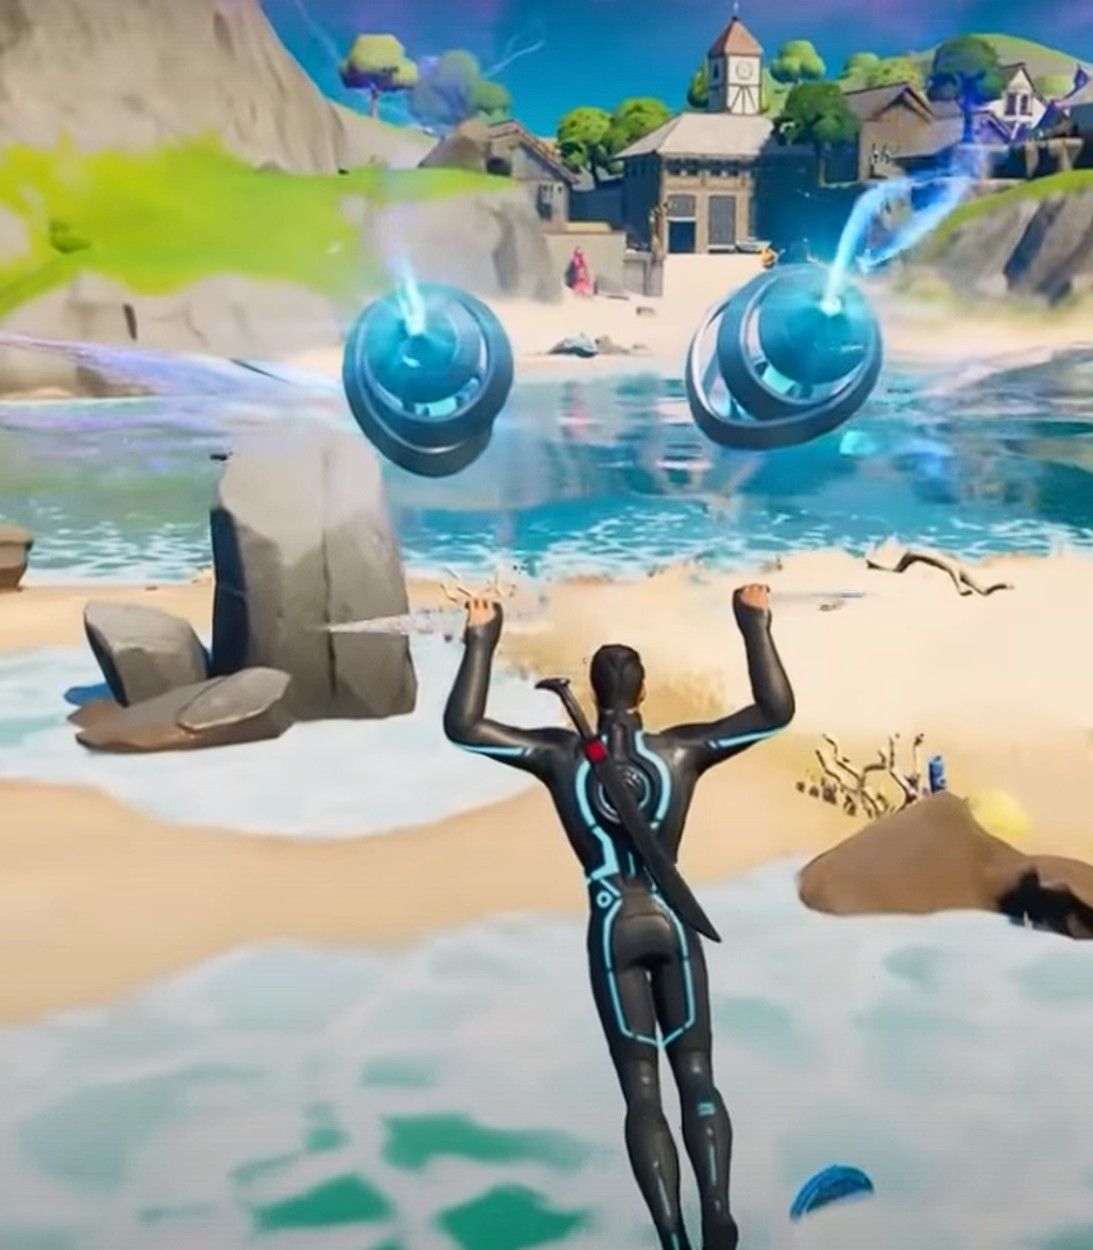 A player glides to a Blue XP Coin in the ocean waters in Fortnite Season 5